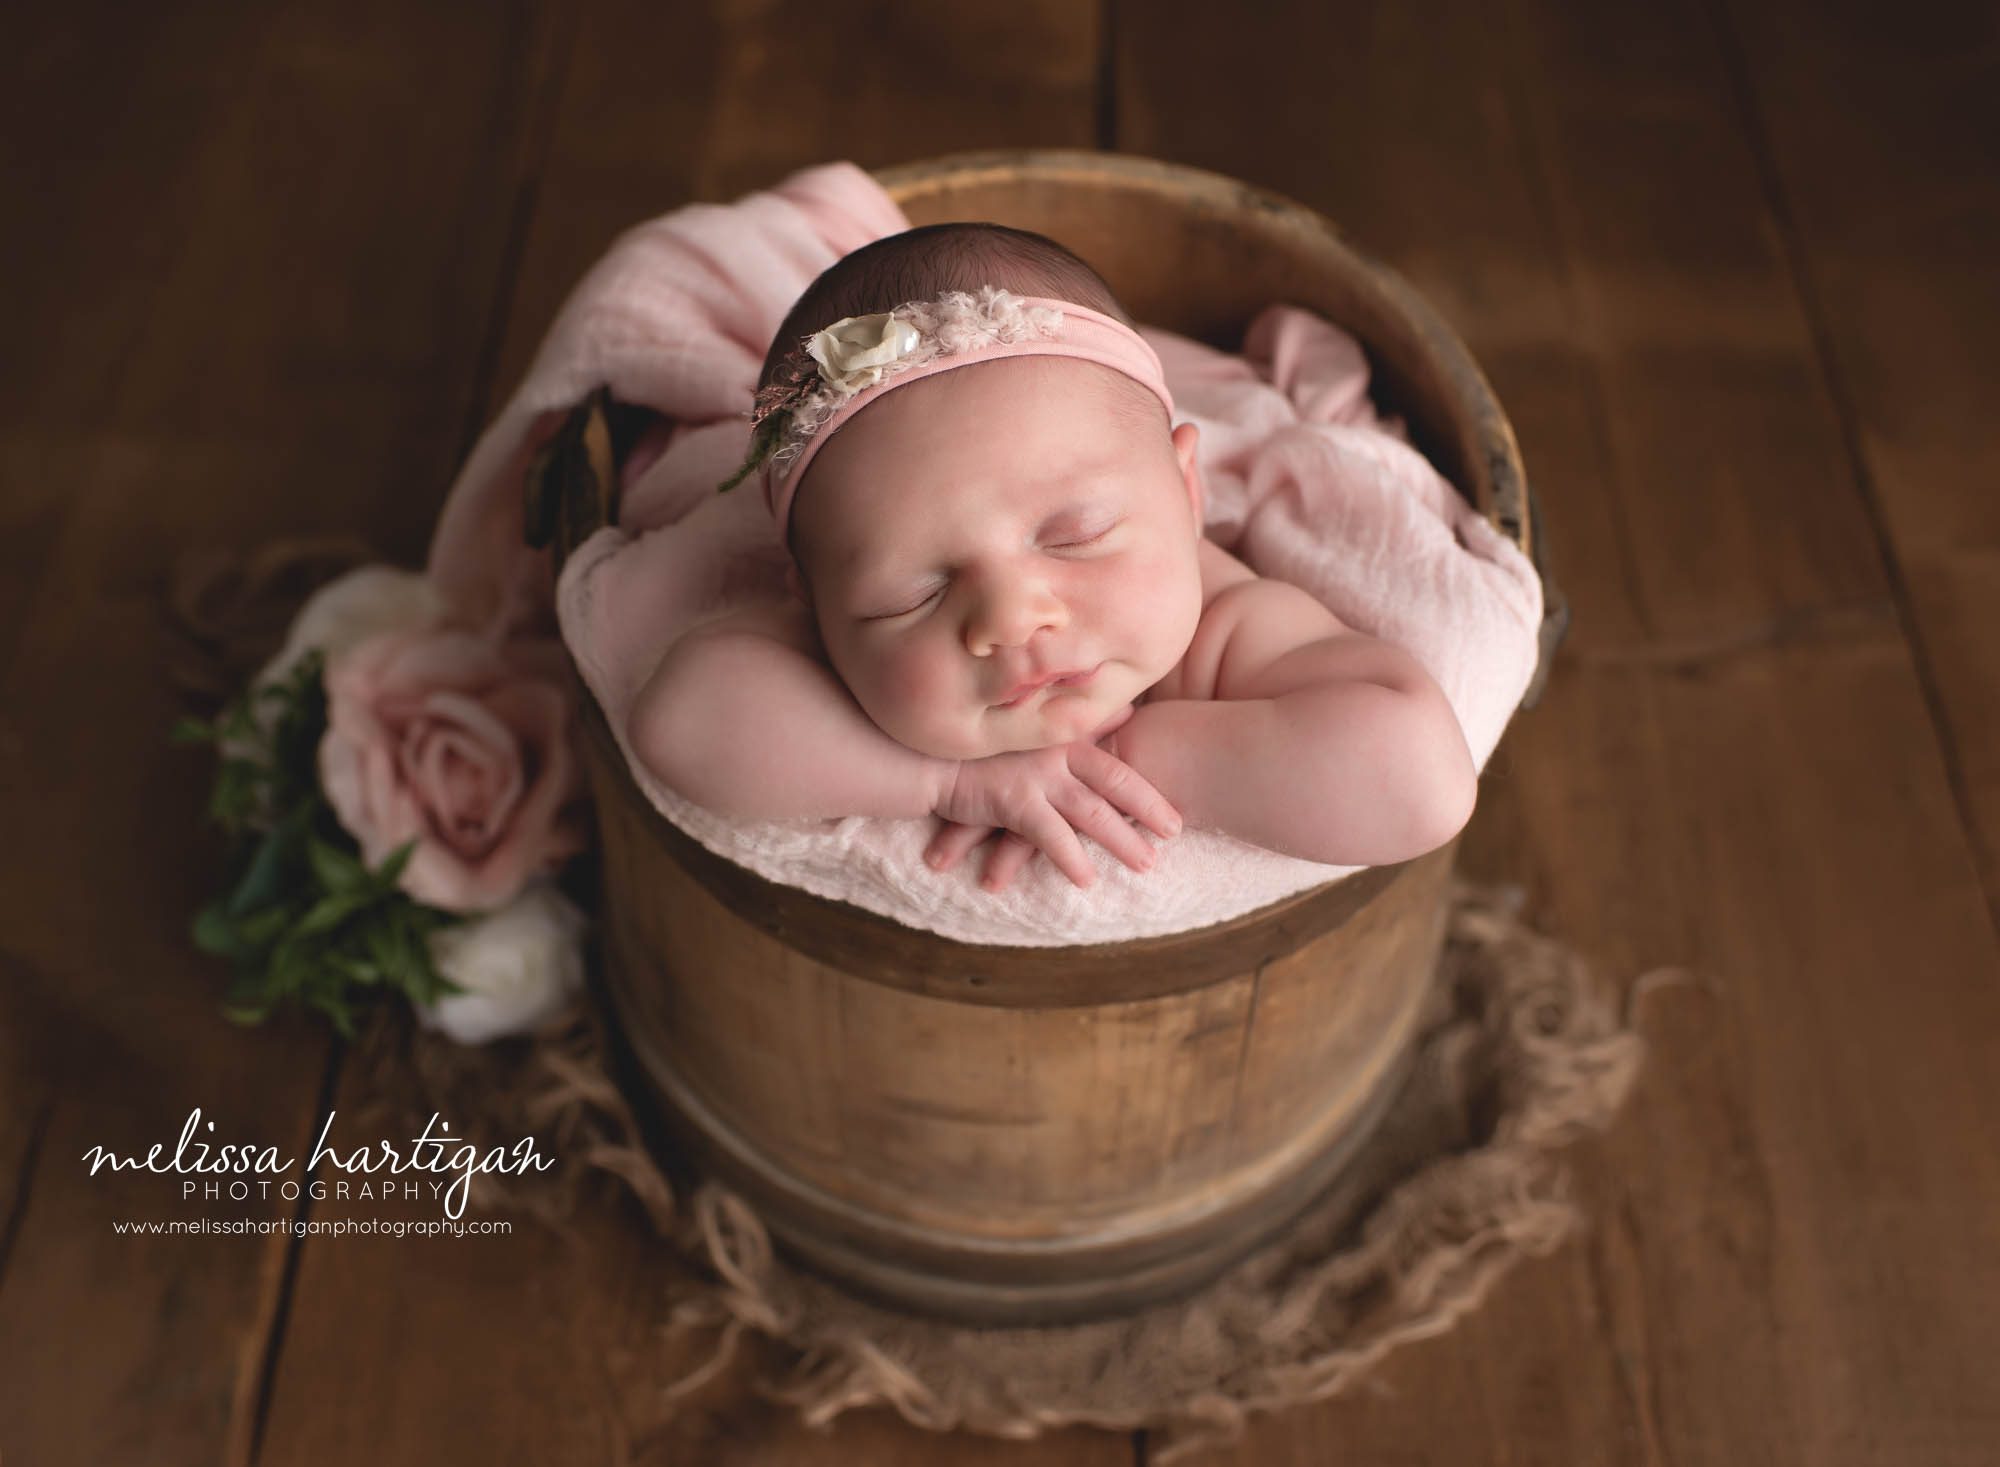 Baby girl posed in wooden rustic busket with pink flowers and pink headband